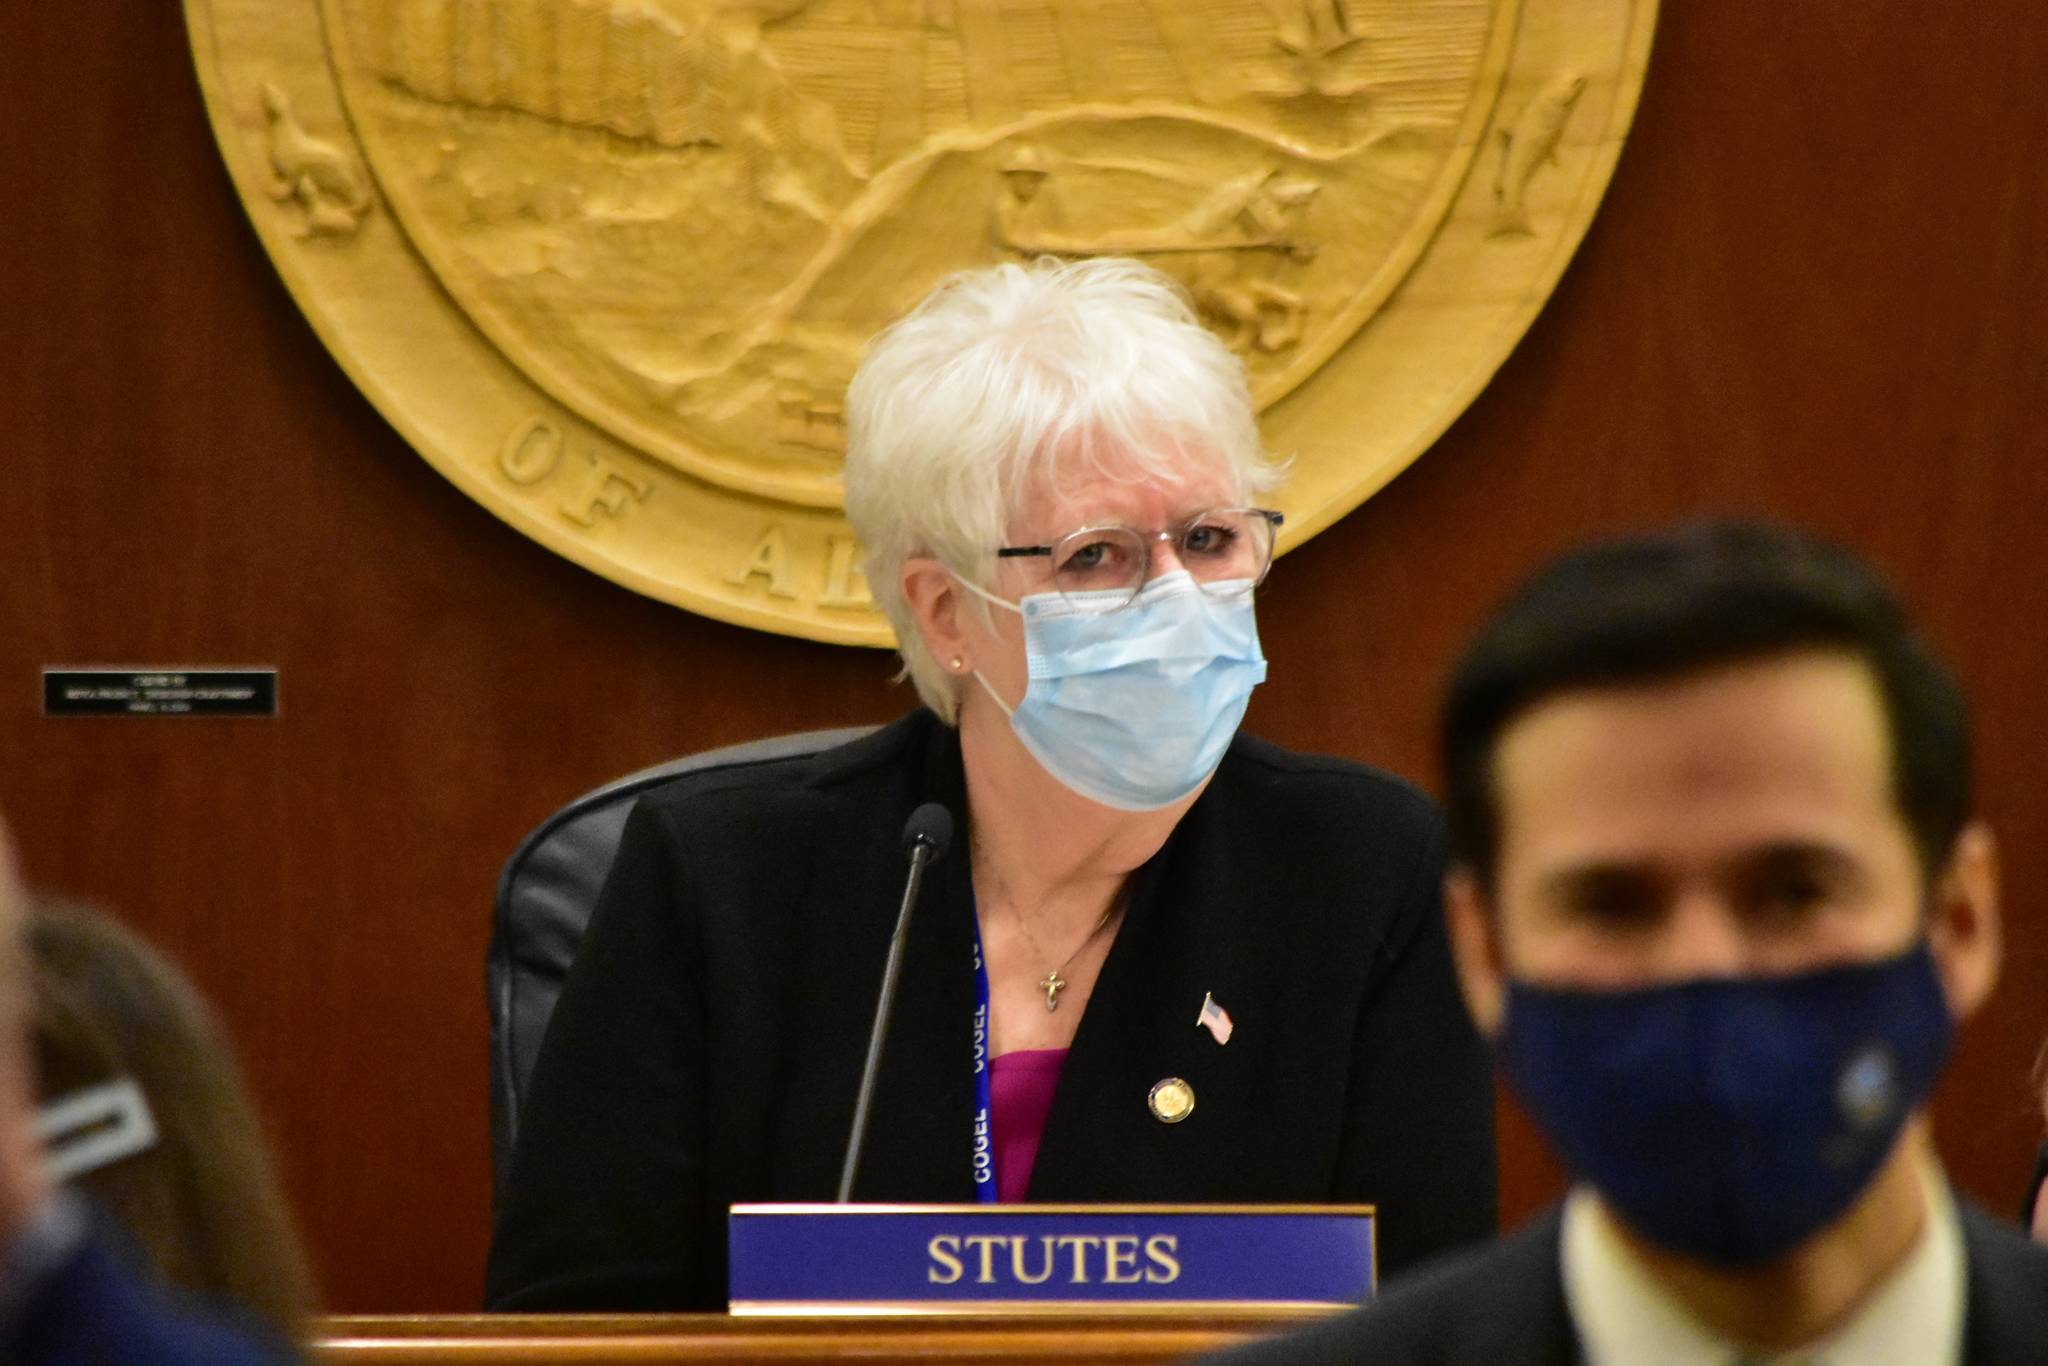 Rep. Louise Stutes, R-Kodiak, was elected Speaker of the House of Representatives on Thursday, Feb. 11, 2021 but a clear majority still hasn’t formed in the body. (Peter Segall / Juneau Empire)